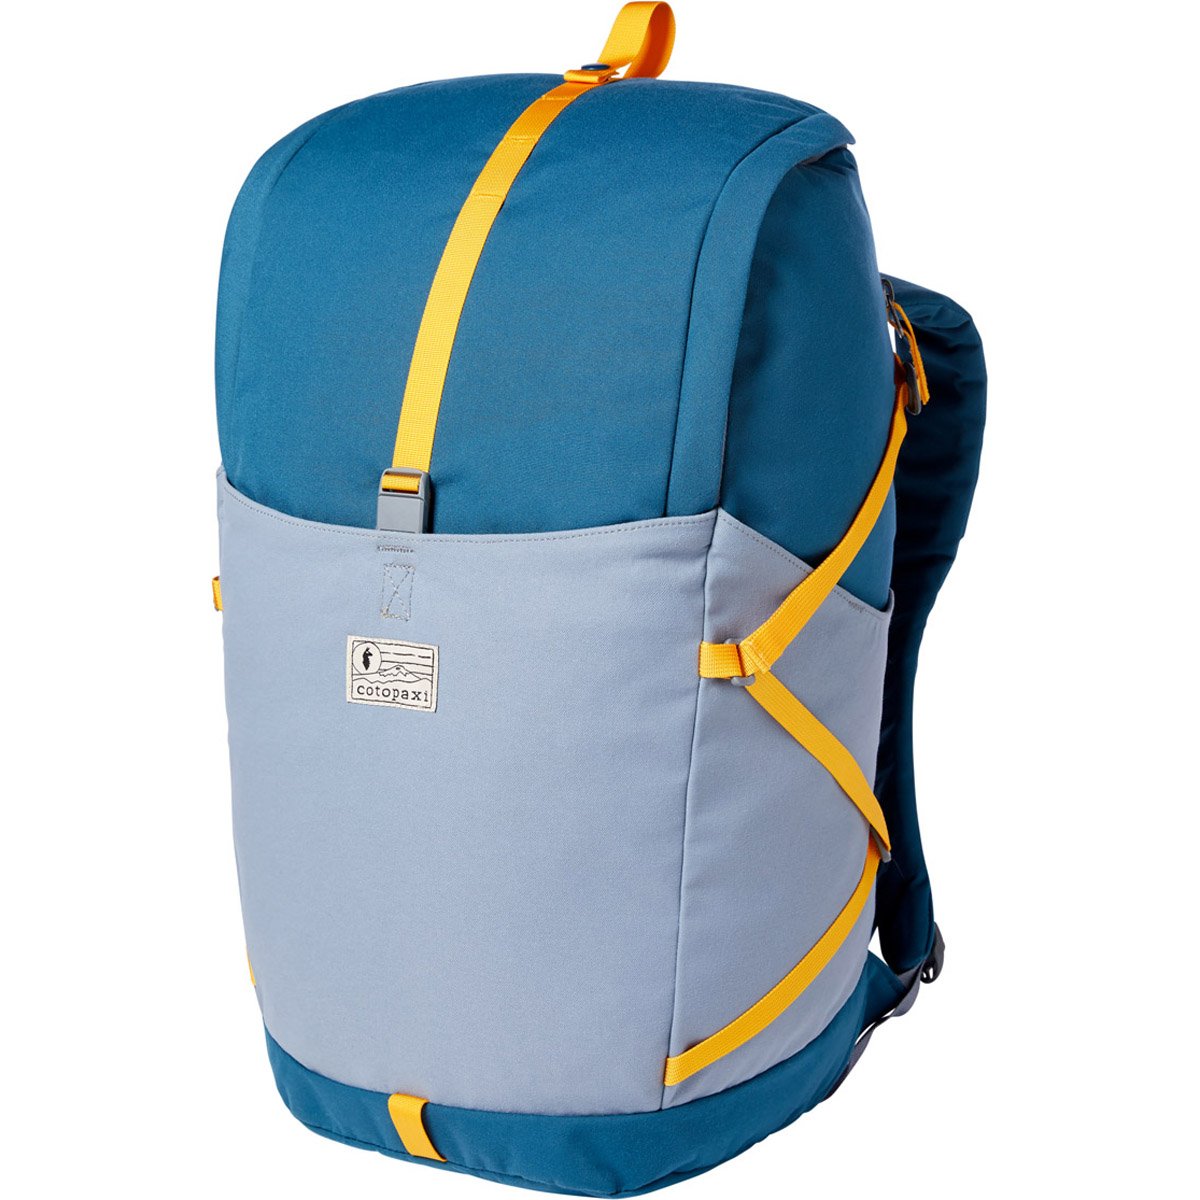 Ostra 30L Pack-Cotopaxi-Indigo-30L-Uncle Dan&#39;s, Rock/Creek, and Gearhead Outfitters